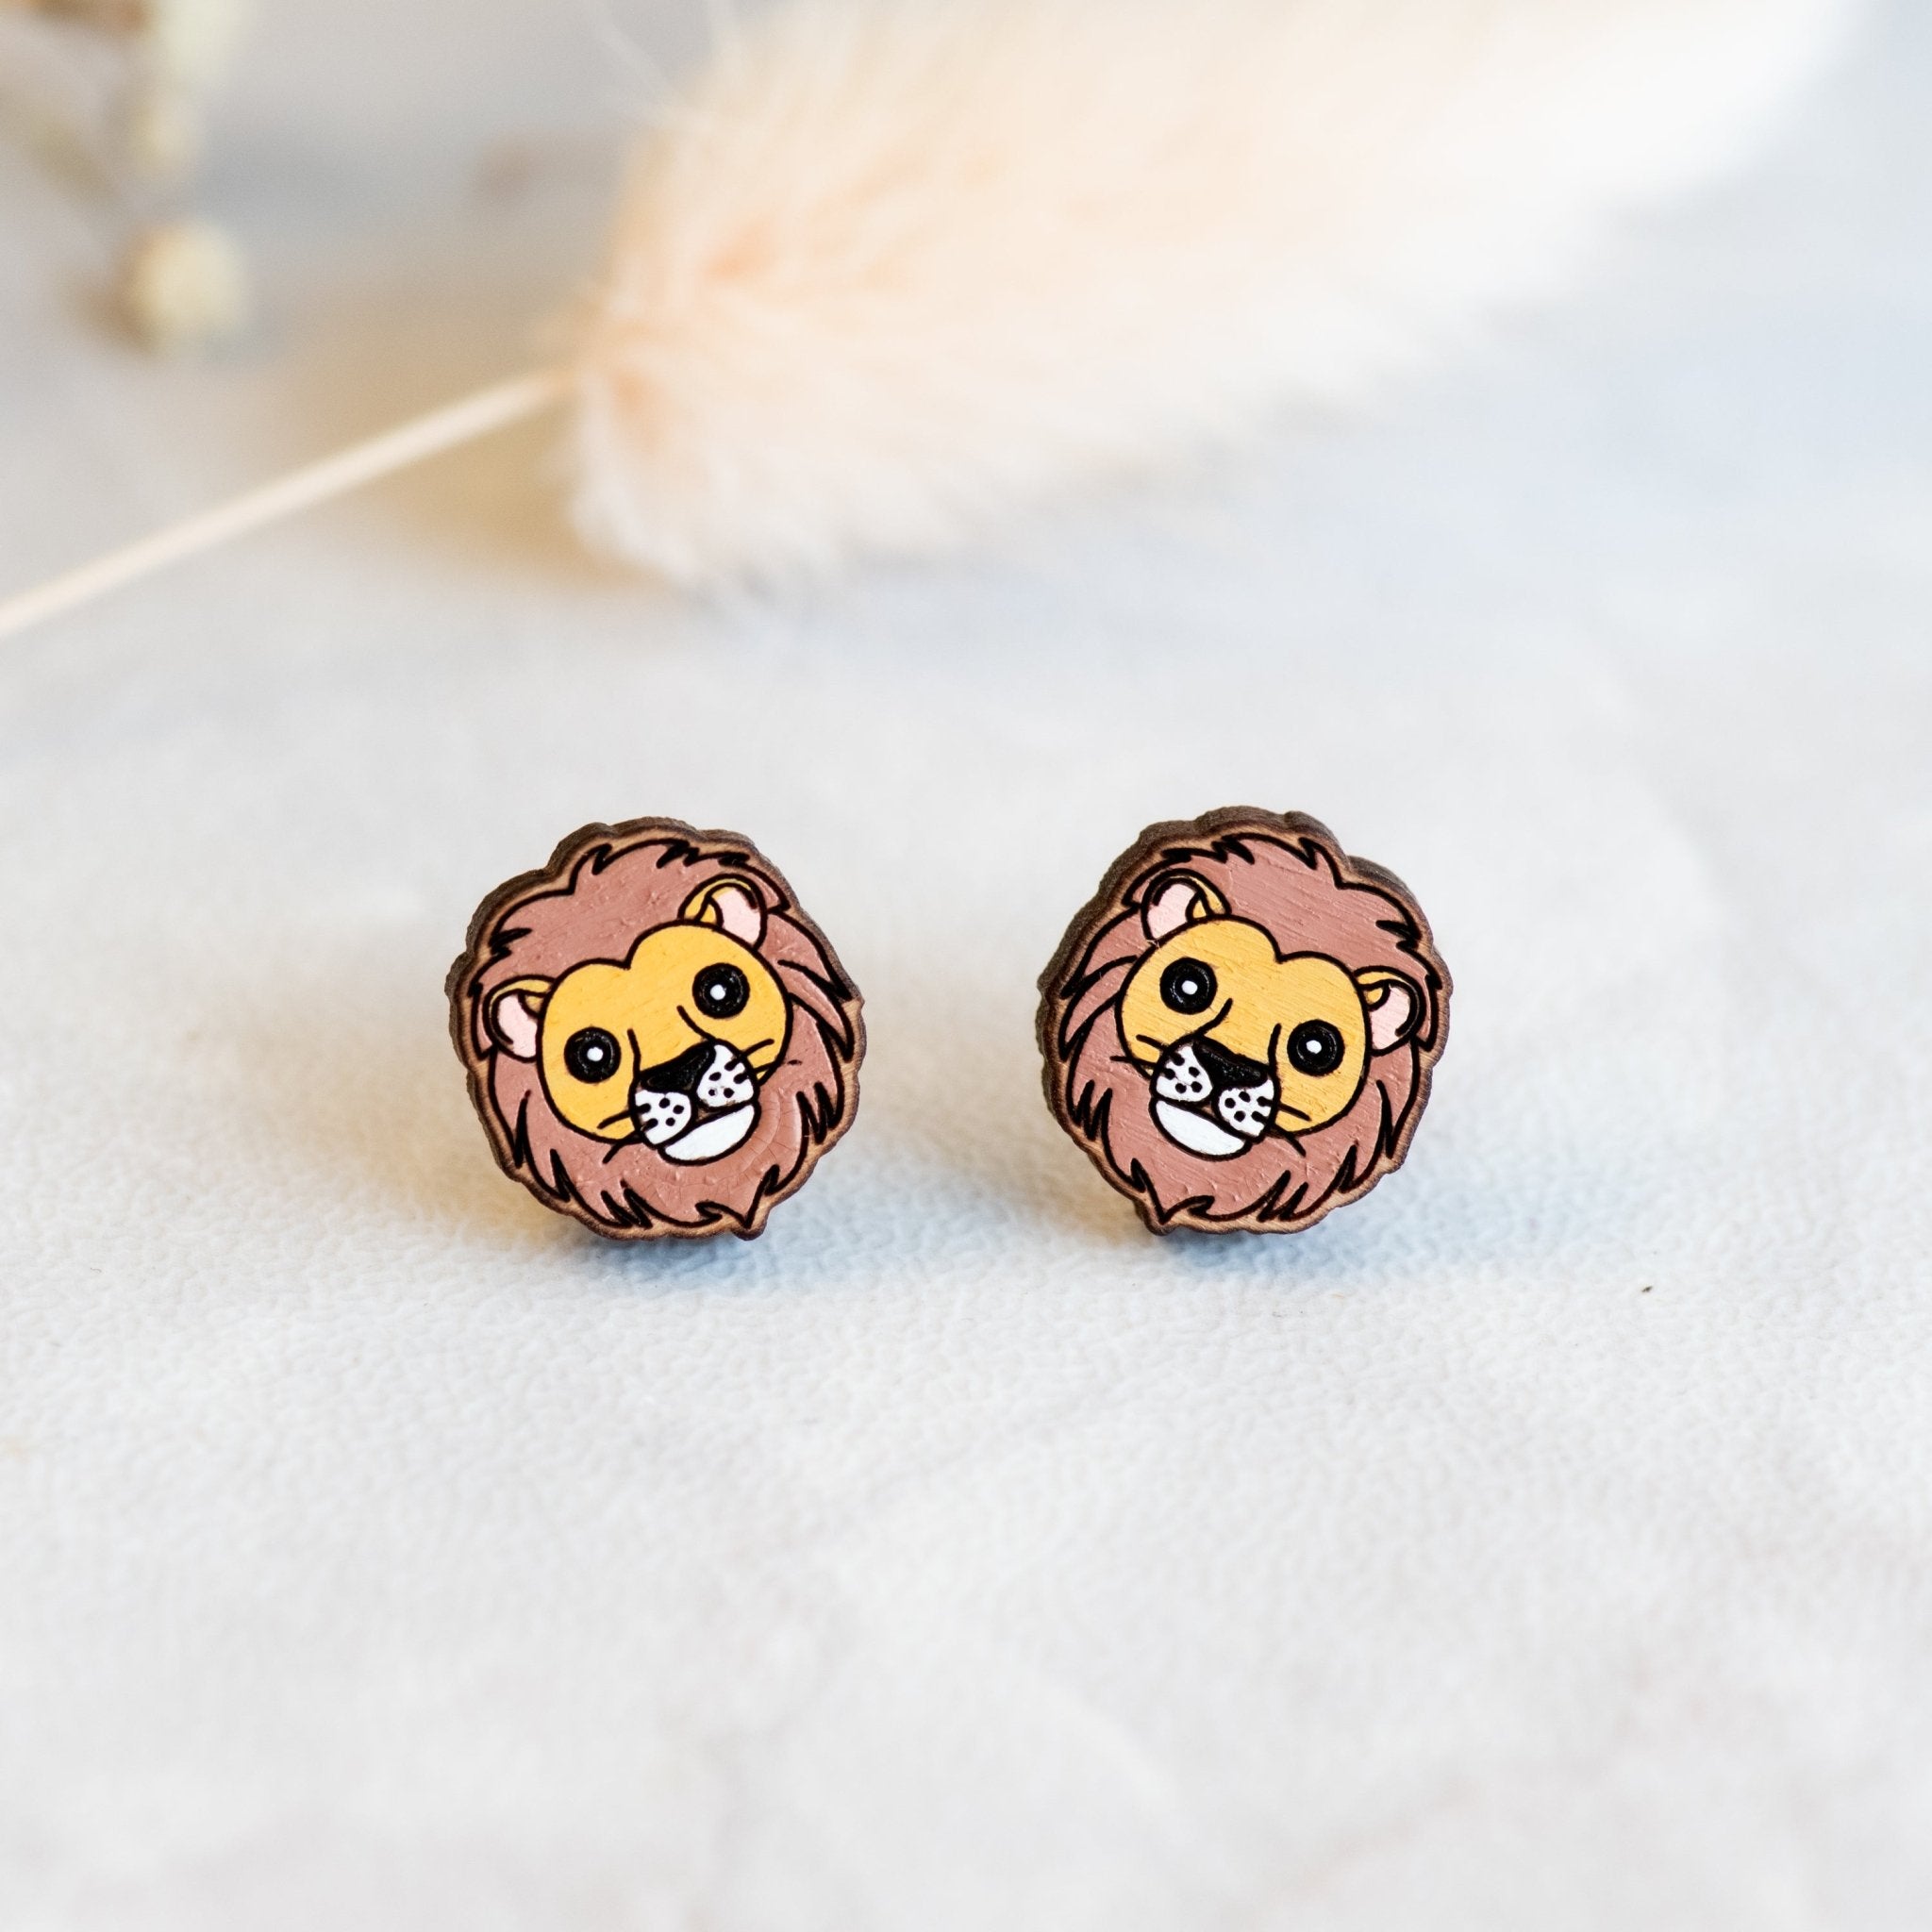 Hand-painted Lion Earrings Cherry Wood Earrings - PEL10193 - Robin Valley Official Store